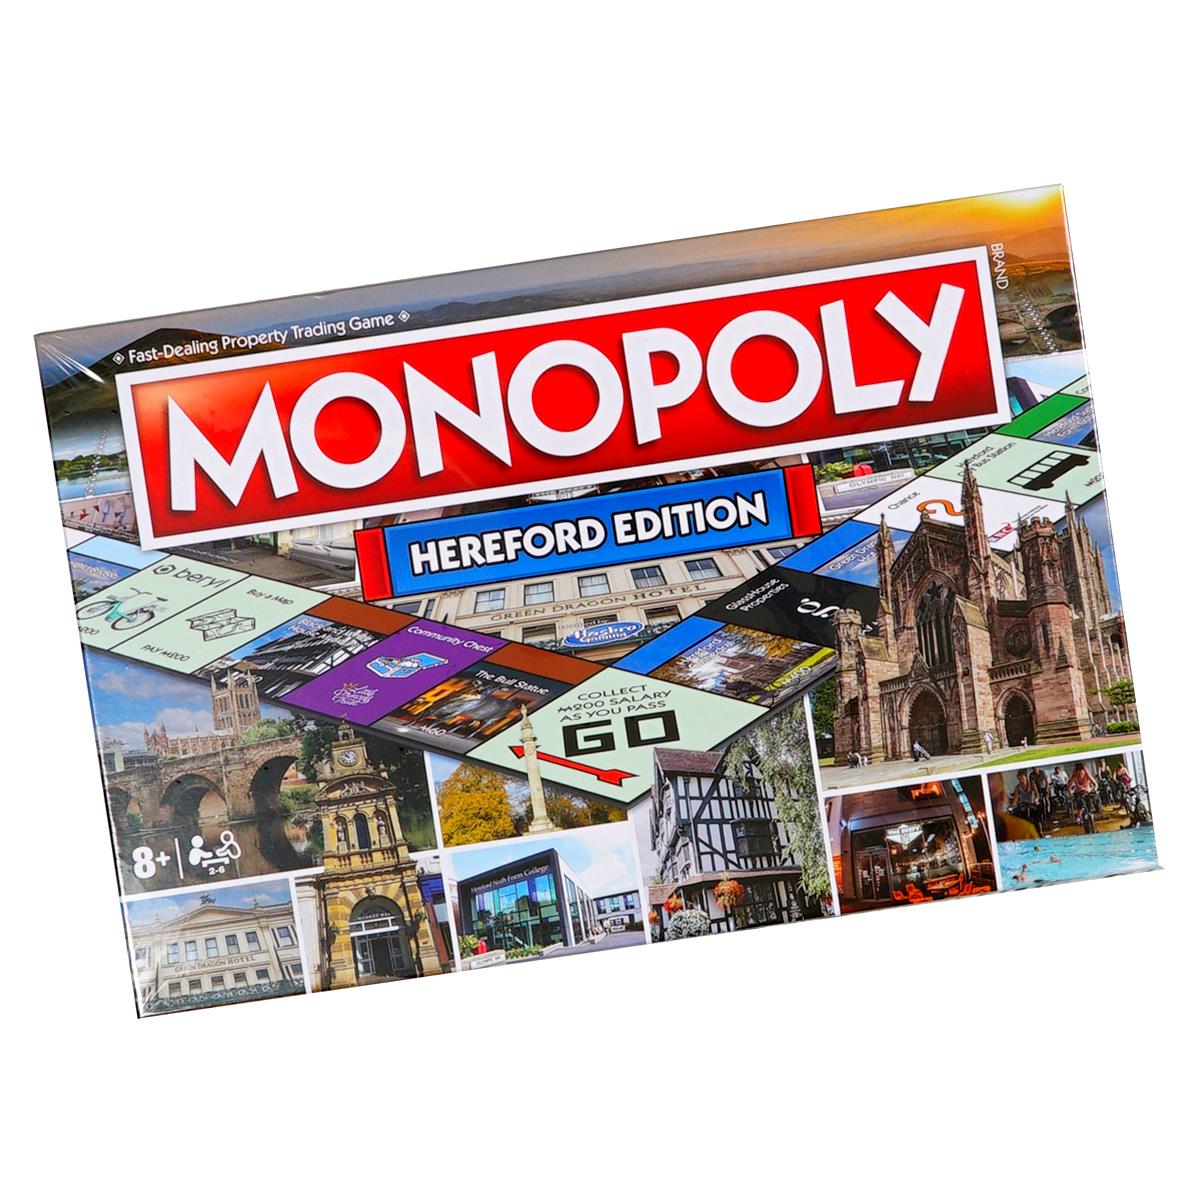 What makes Hereford Monopoly special?